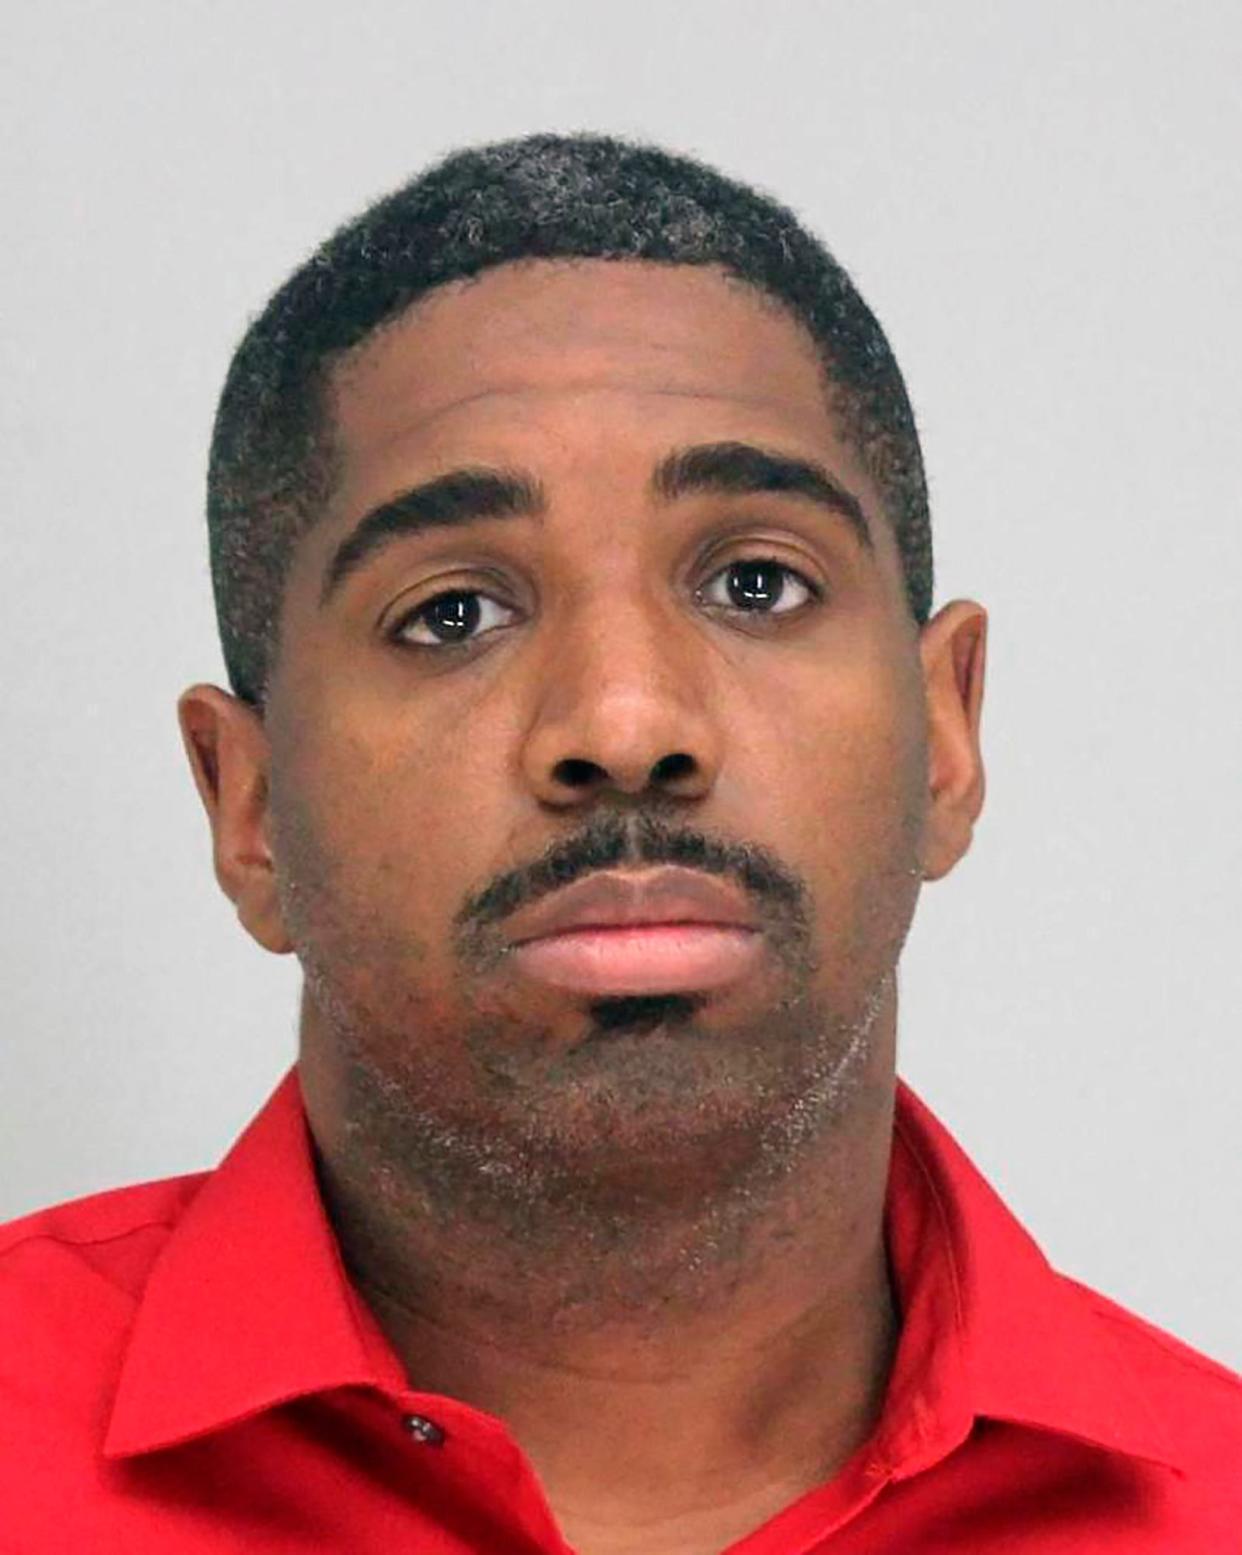 This photo provided by the Dallas County Sheriff's Office shows Bryan Riser. Authorities say Riser, a Dallas police officer, has been arrested on two counts of capital murder, more than a year and a half after a man told investigators that he kidnapped and killed two people at the officer’s instruction in 2017. (Dallas County Sheriff's Office via AP) (AP)